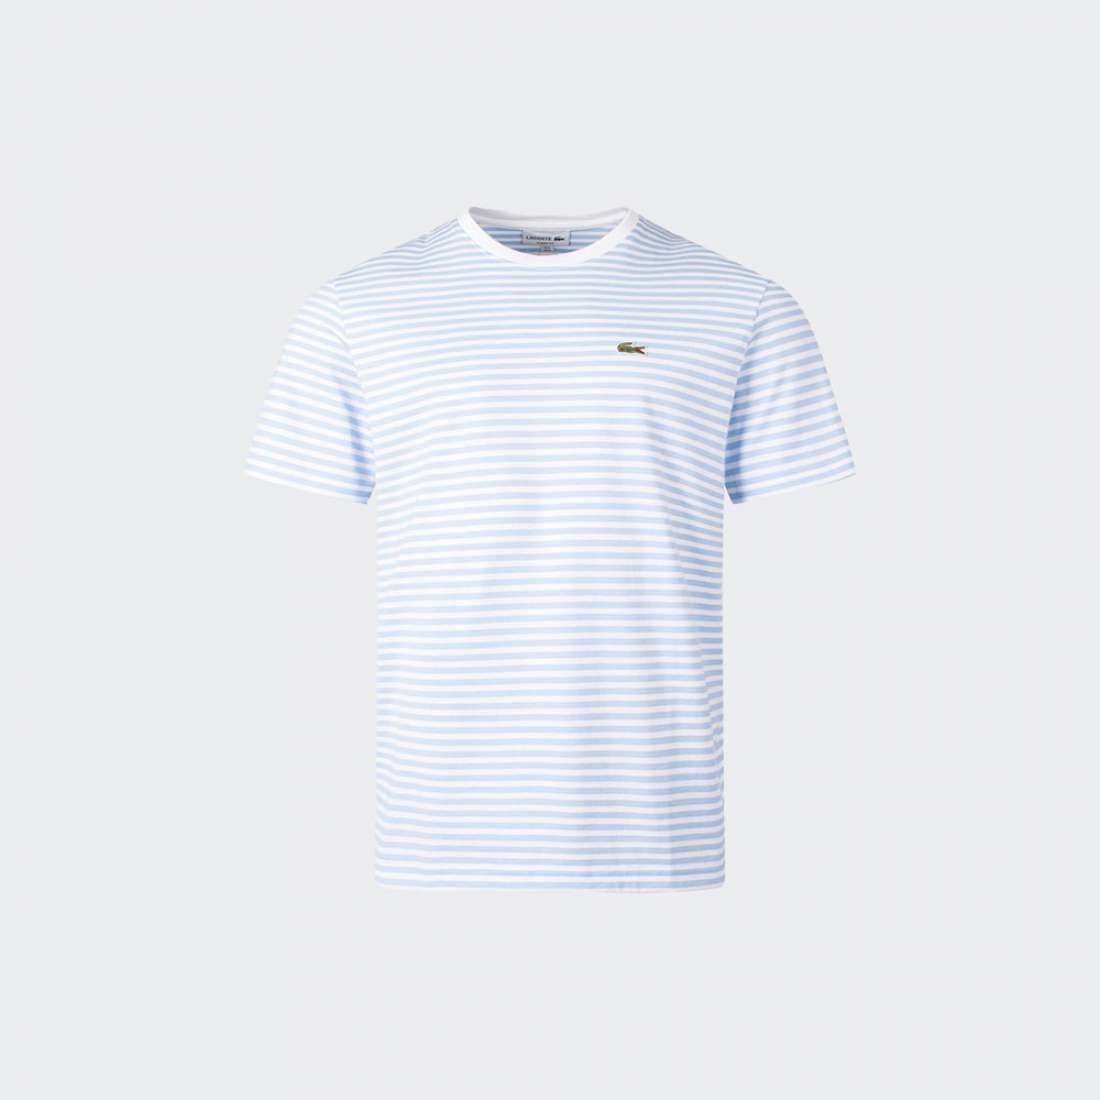 TSHIRT LACOSTE TH9749-00 WHITE/OVERVIEW